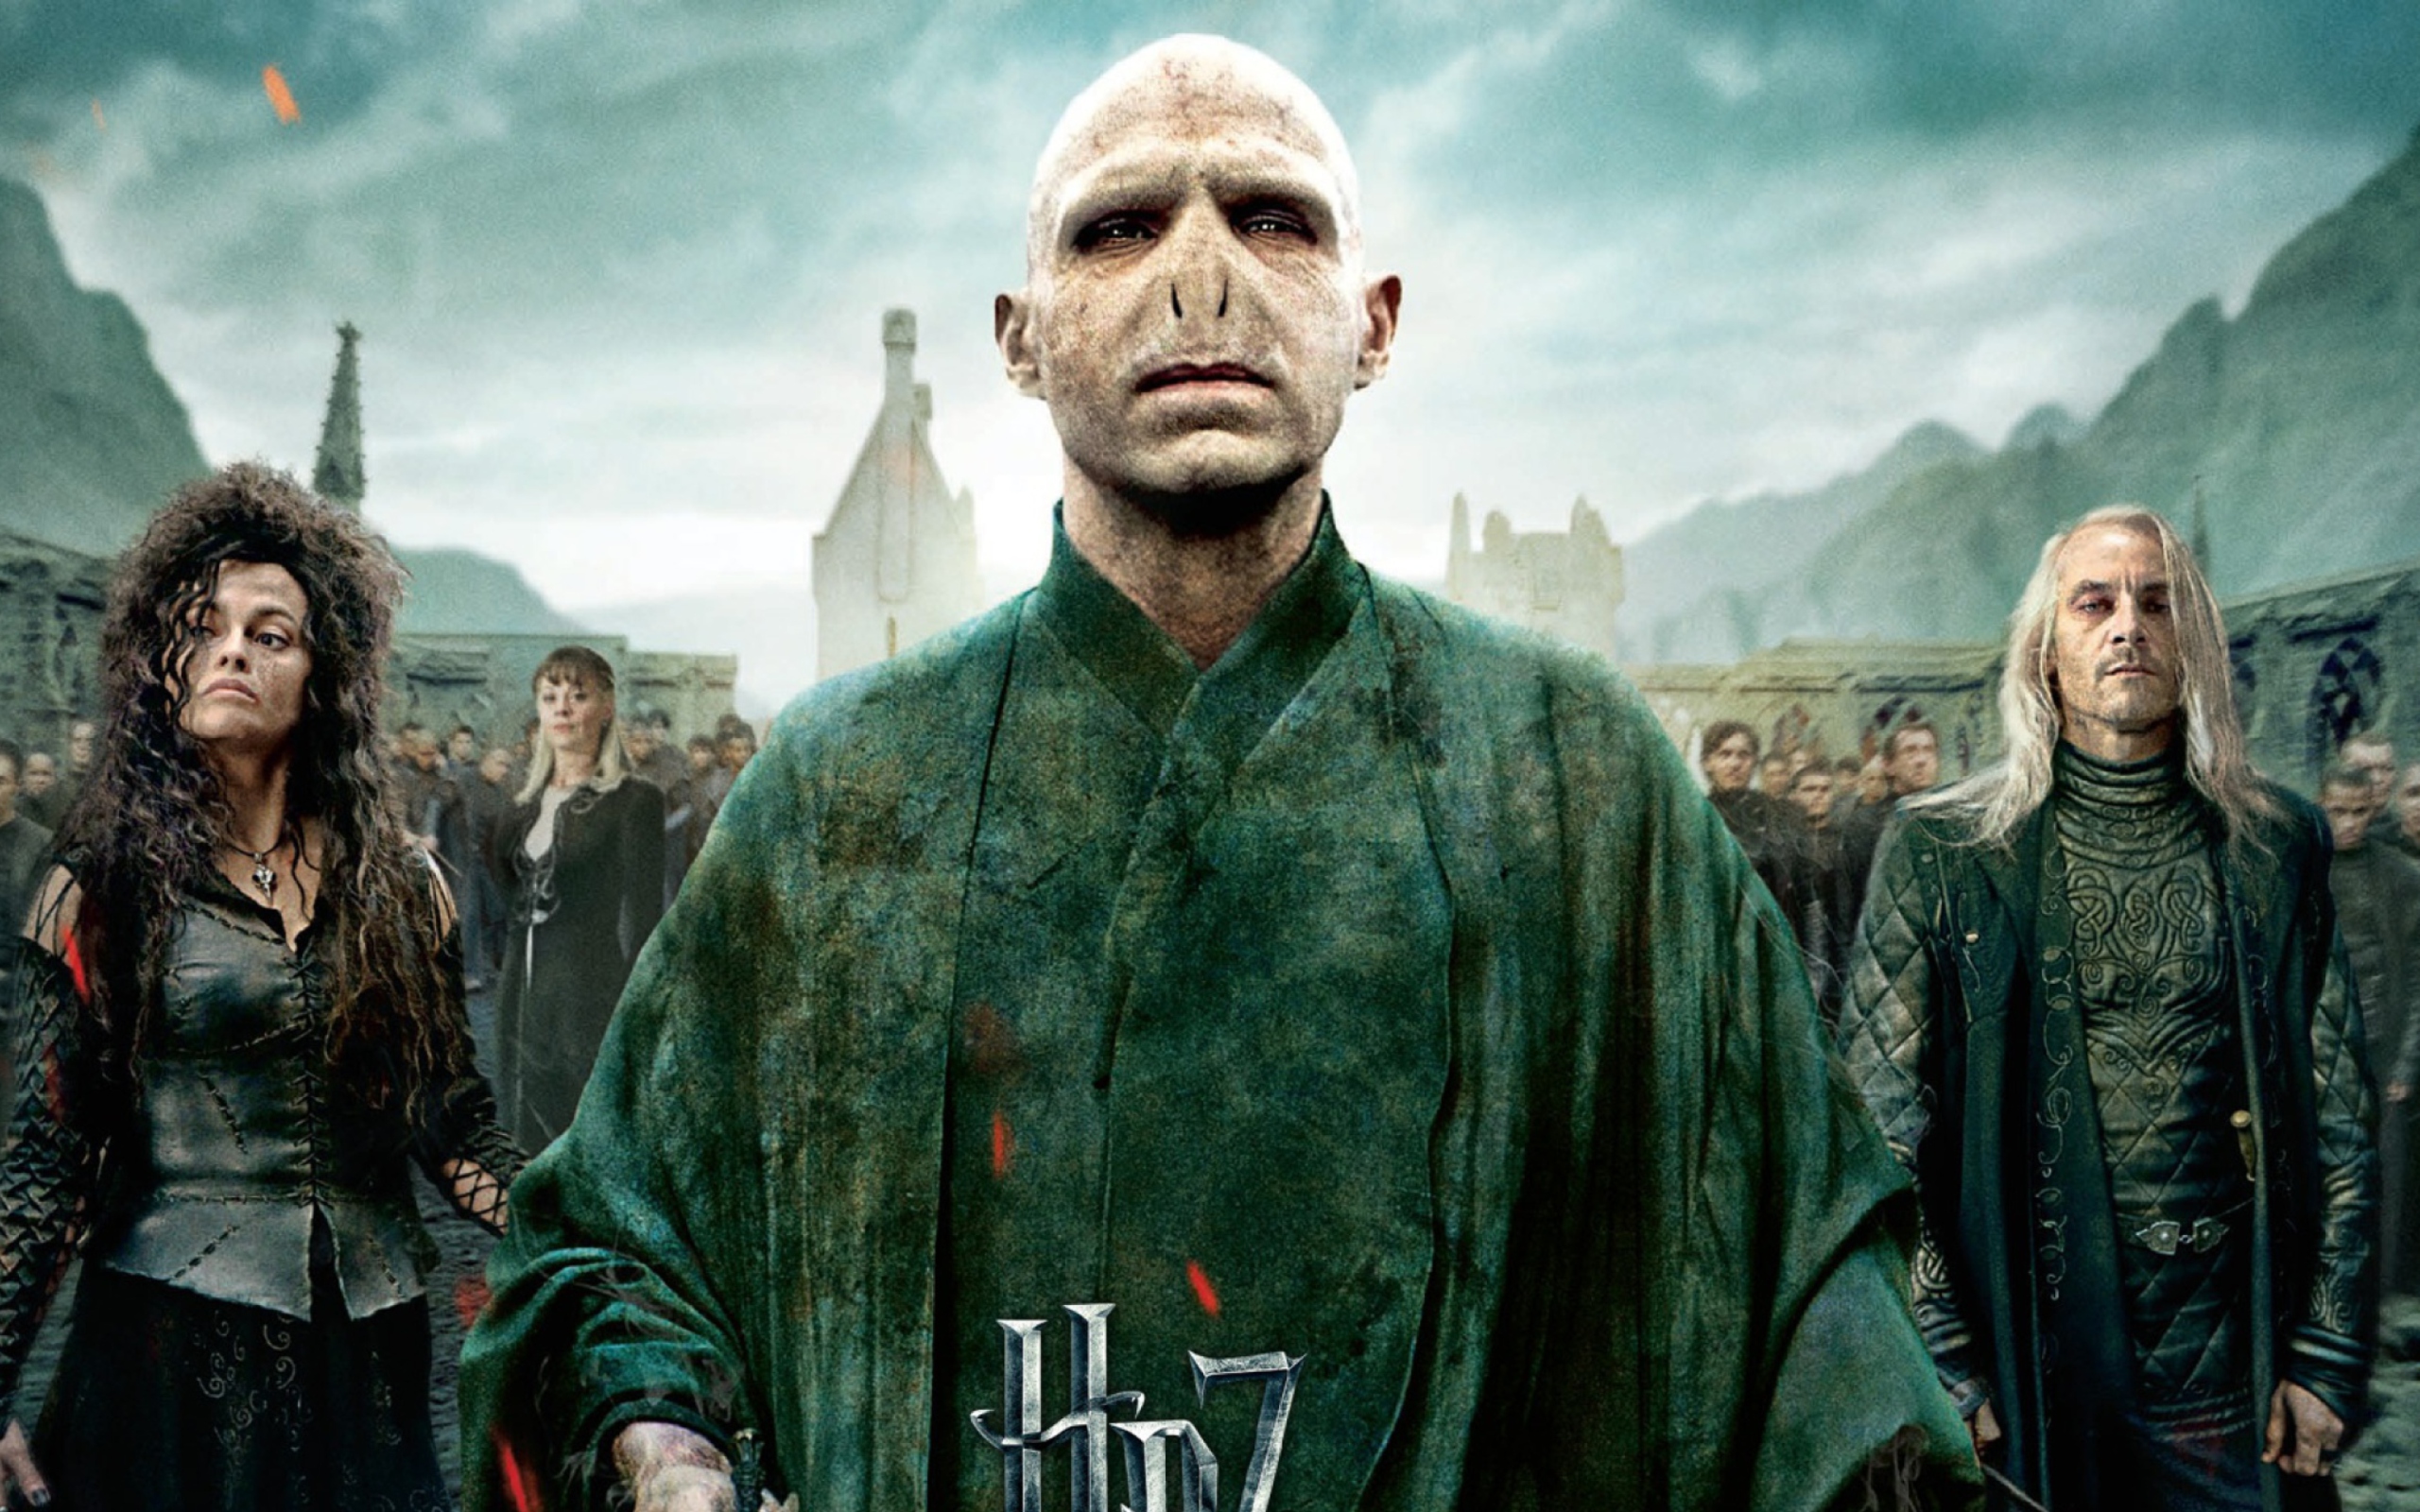 Das Harry Potter And The Deathly Hallows Part 2 Wallpaper 2560x1600